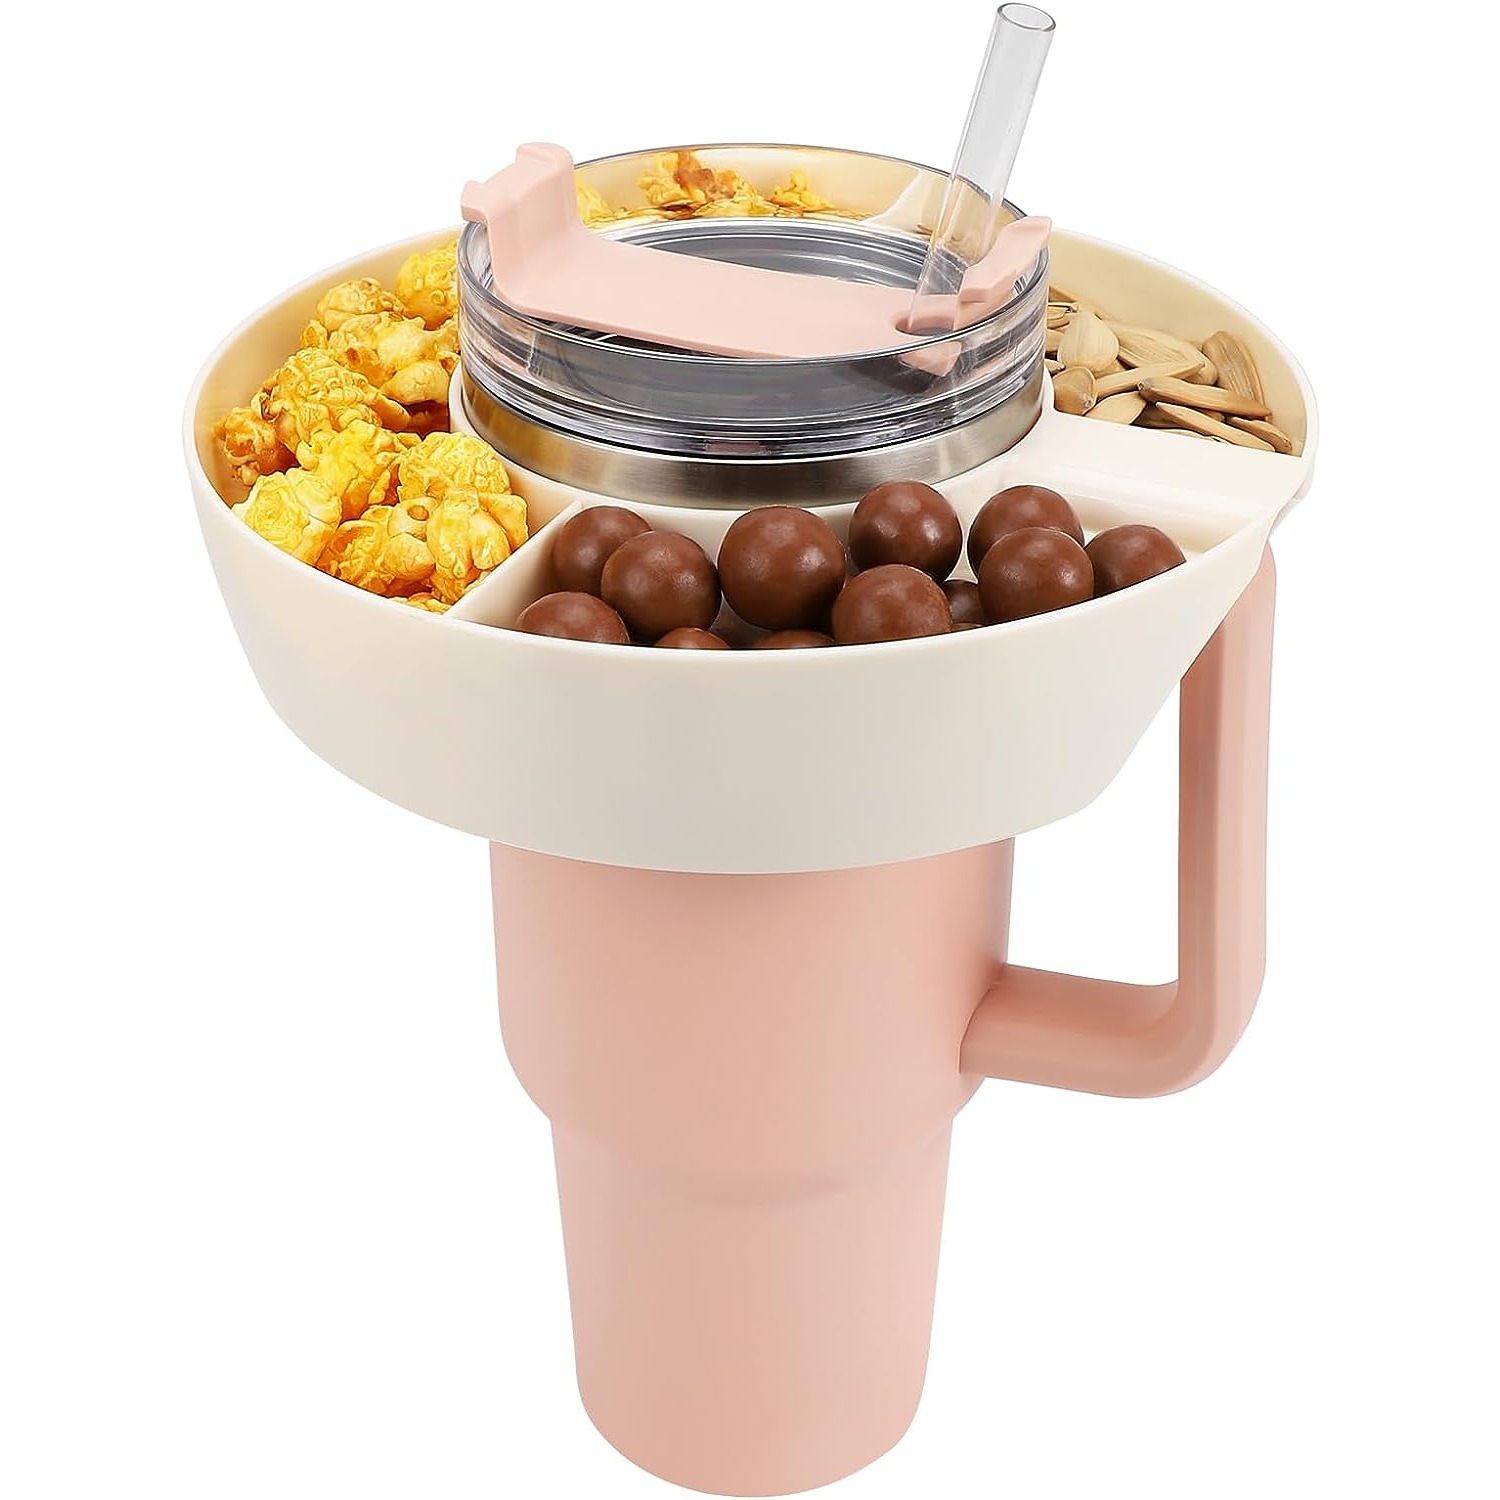 Cereal to Go Cup 29oz Portable Travel Cereal Bowl and Milk Container with  Spoon Durable Breakfast Cup Container accessories - AliExpress